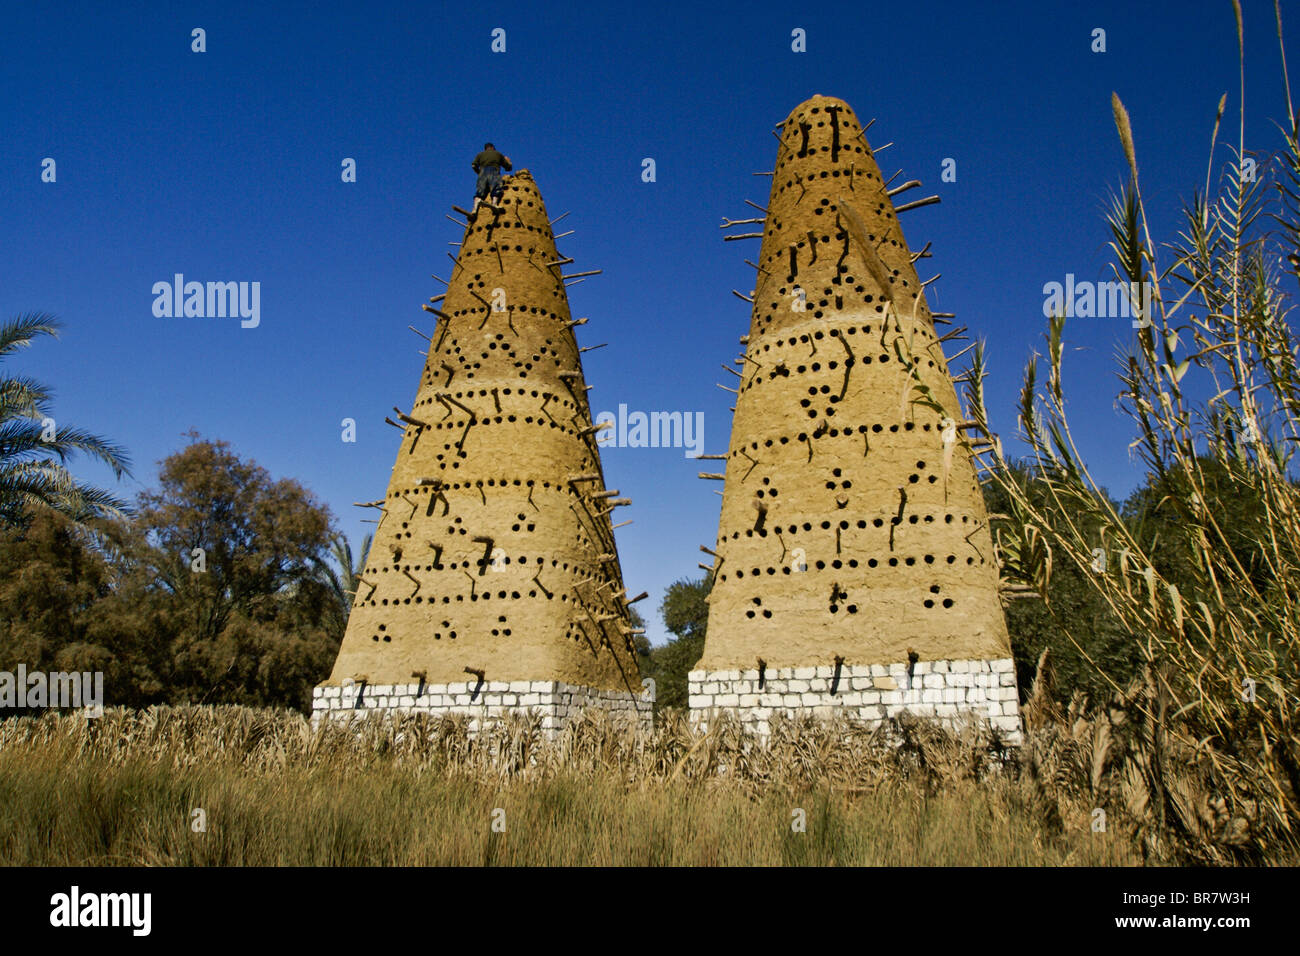 Man building a pigeon tower, Siwa Oasis, Egypt Stock Photo